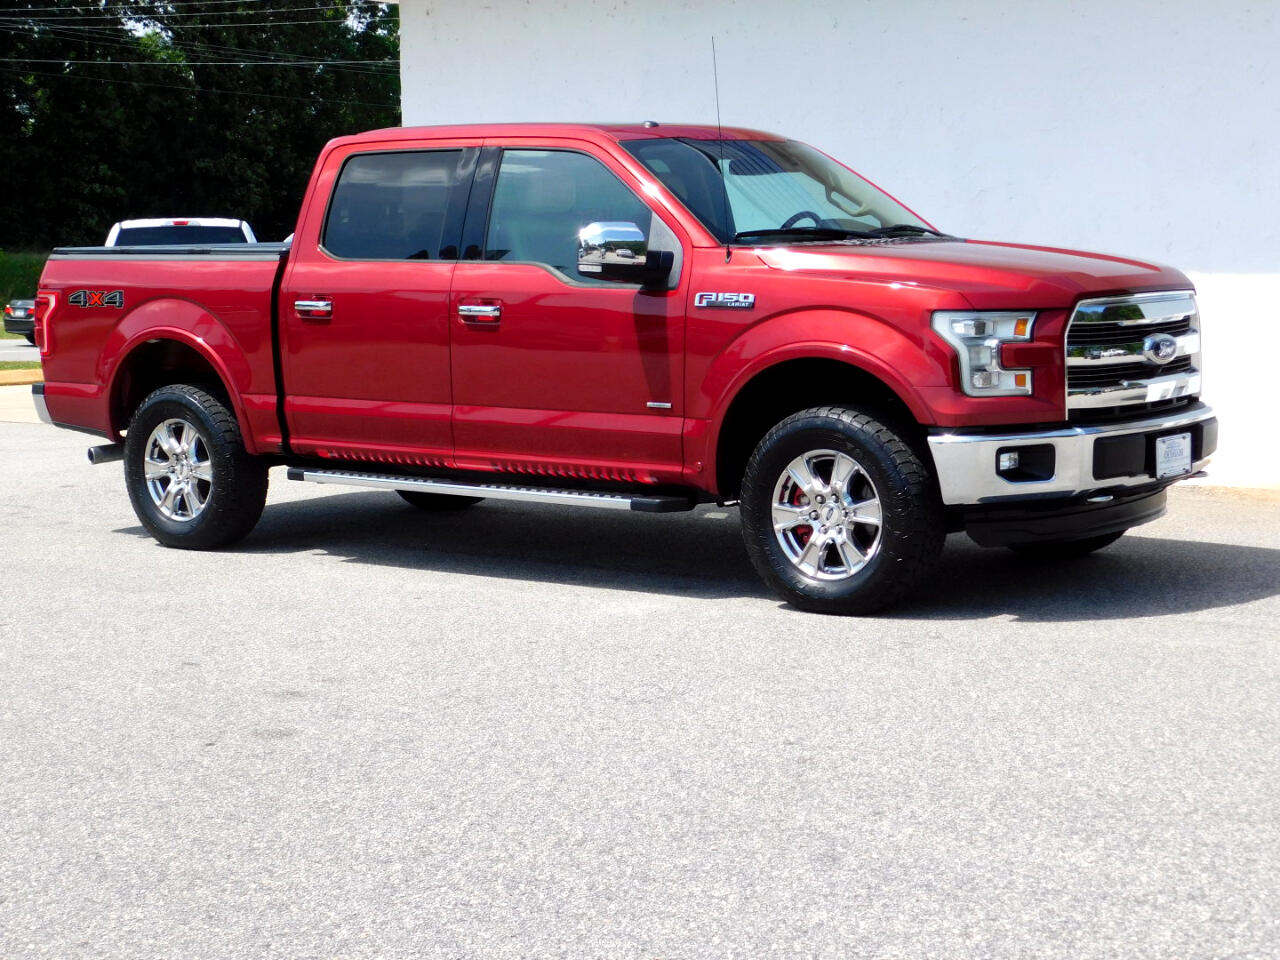 2015 Ford F-150 Lariat SuperCrew 5.5-ft. Bed 4WD